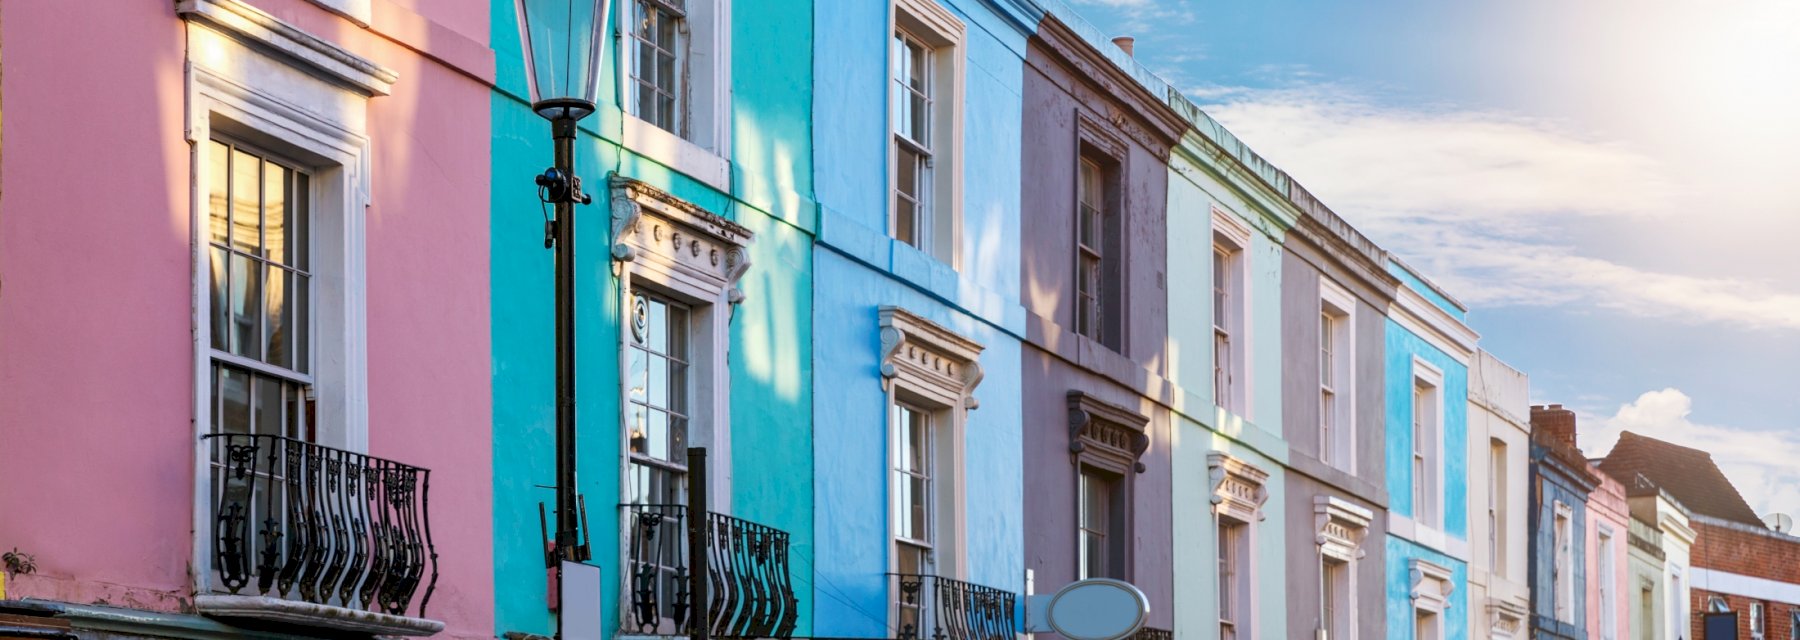 An insider’s guide to London's Notting Hill